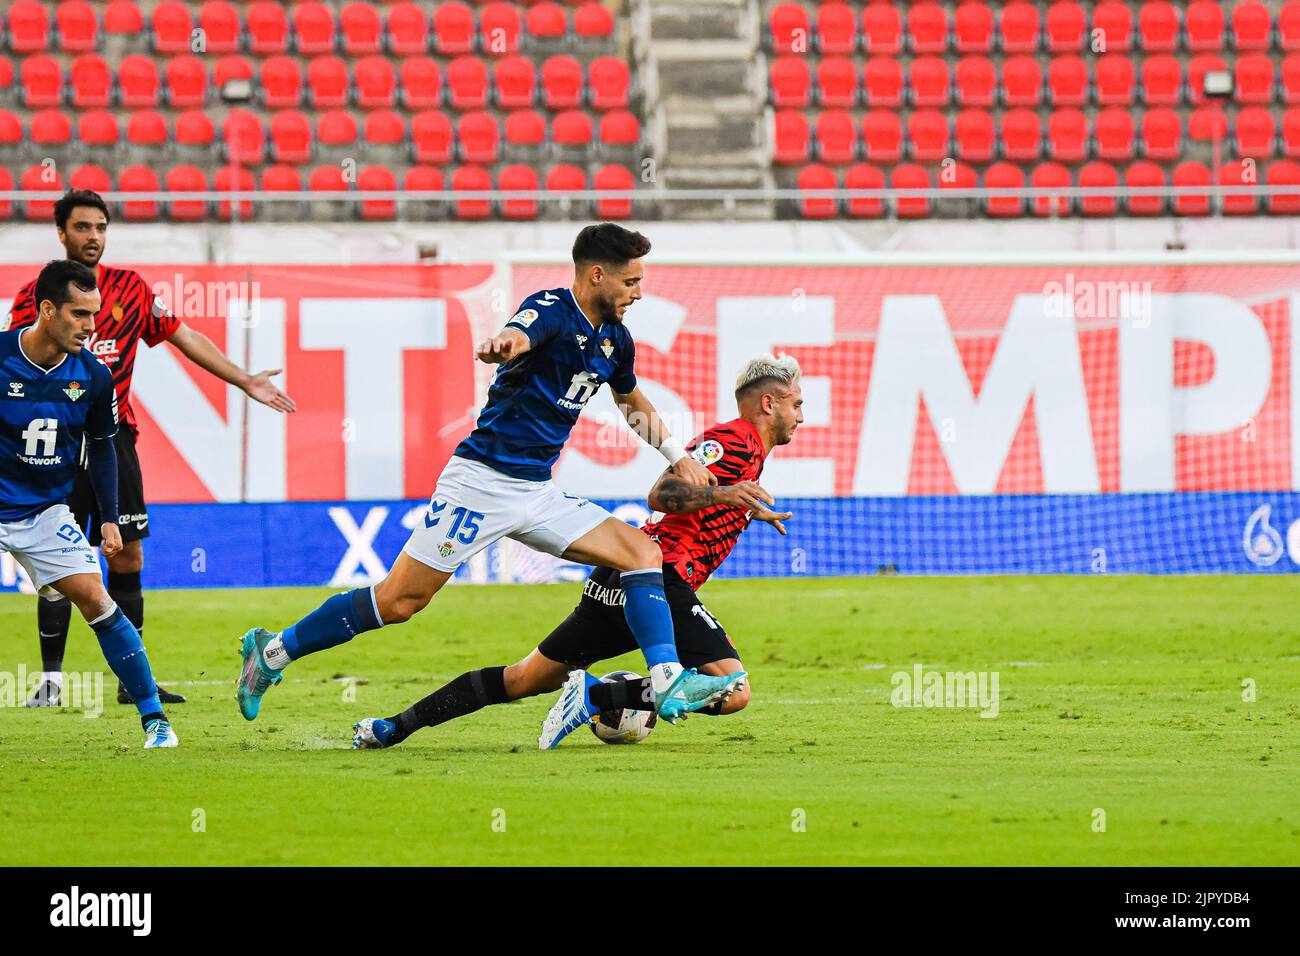 MALLORCA, SPAIN - AUGUST 20: Alex Moreno of Real Betis and Pablo Maffeo of RCD Mallorca in the match between RCD Mallorca and Real Betis of La Liga Santander on August 20, 2022 at Visit Mallorca Stadium Son Moix in Mallorca, Spain. (Photo by Samuel Carreño/PxImages) Stock Photo